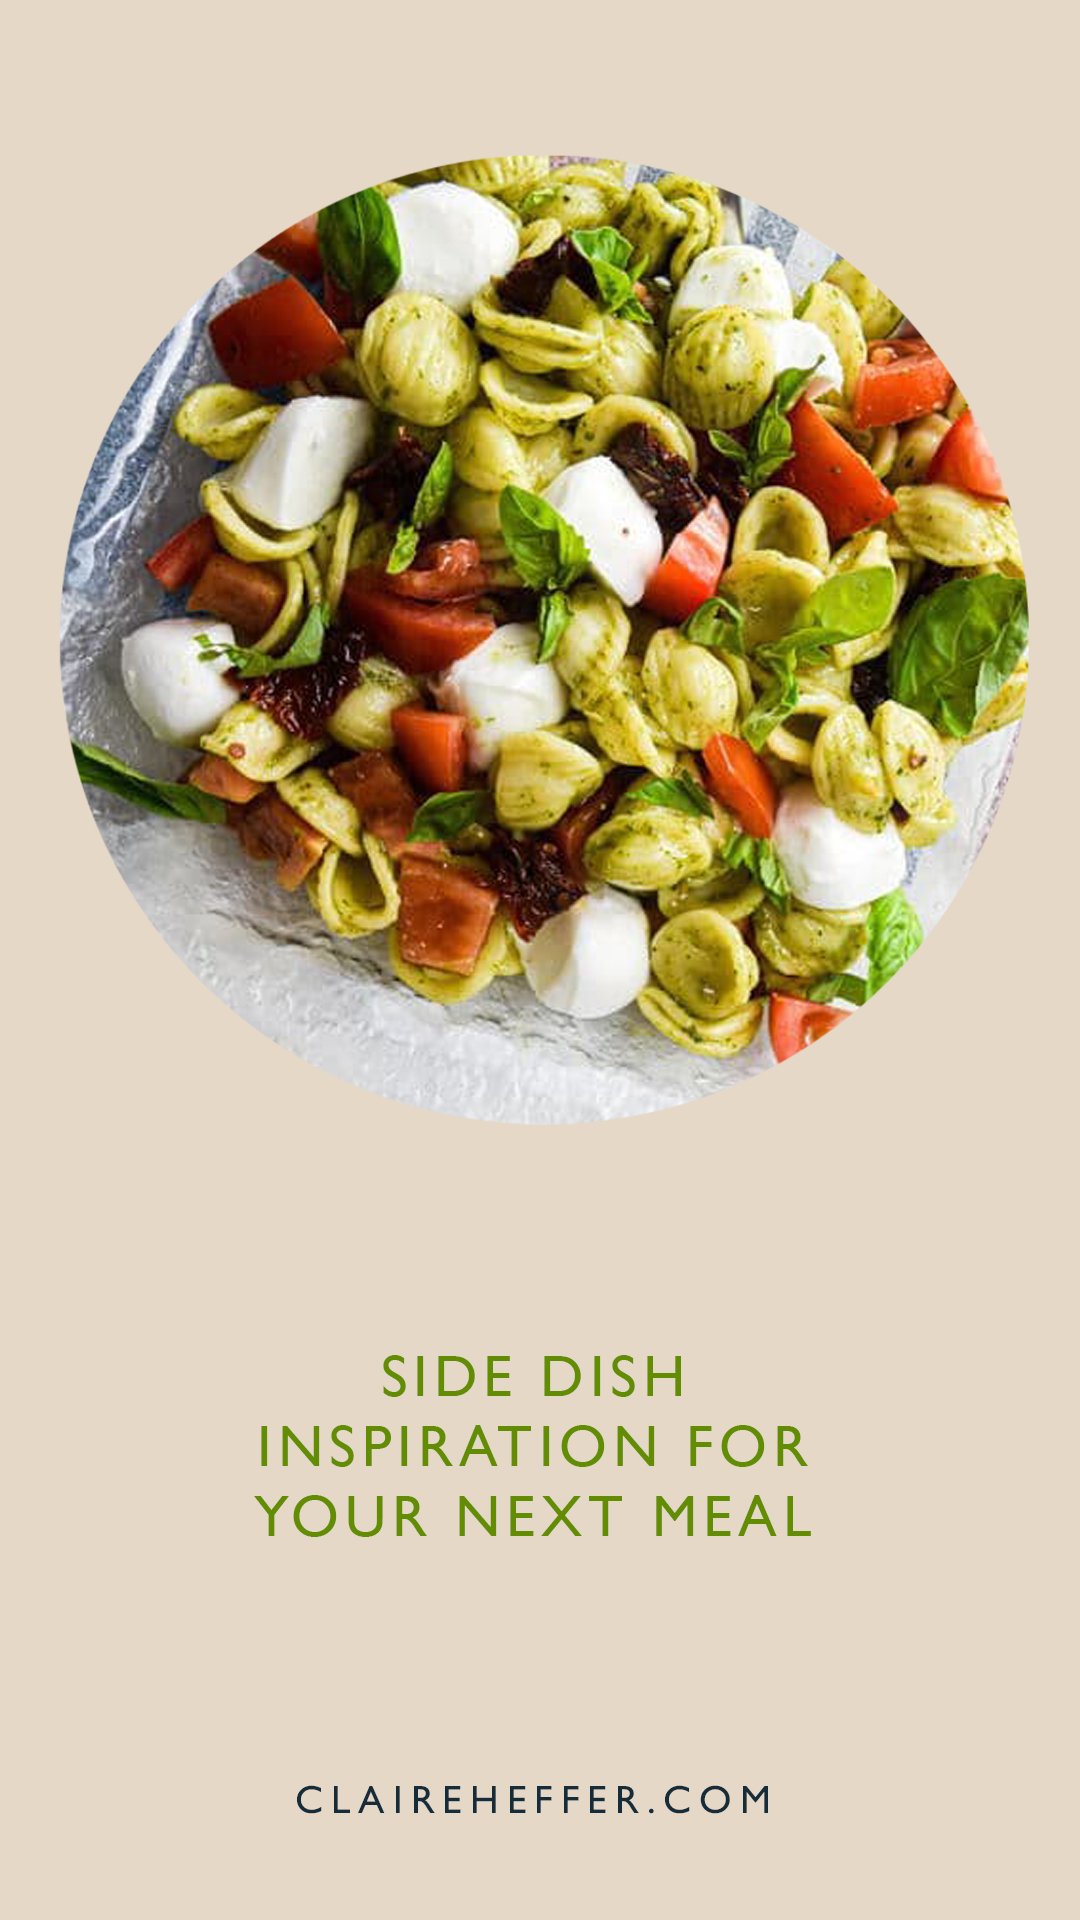  Focus On: Side Dishes, Focus On, Side Dishes, Quick Healthy Side Dishes, Side Dishes To Inspire Your Next Meal, Healthy Side Dishes, Side Dish Inspiration For Your Next Meal, Side Dish Inspiration, Mix Up Your Weeknight Dinners, Side Dishes To Mix U